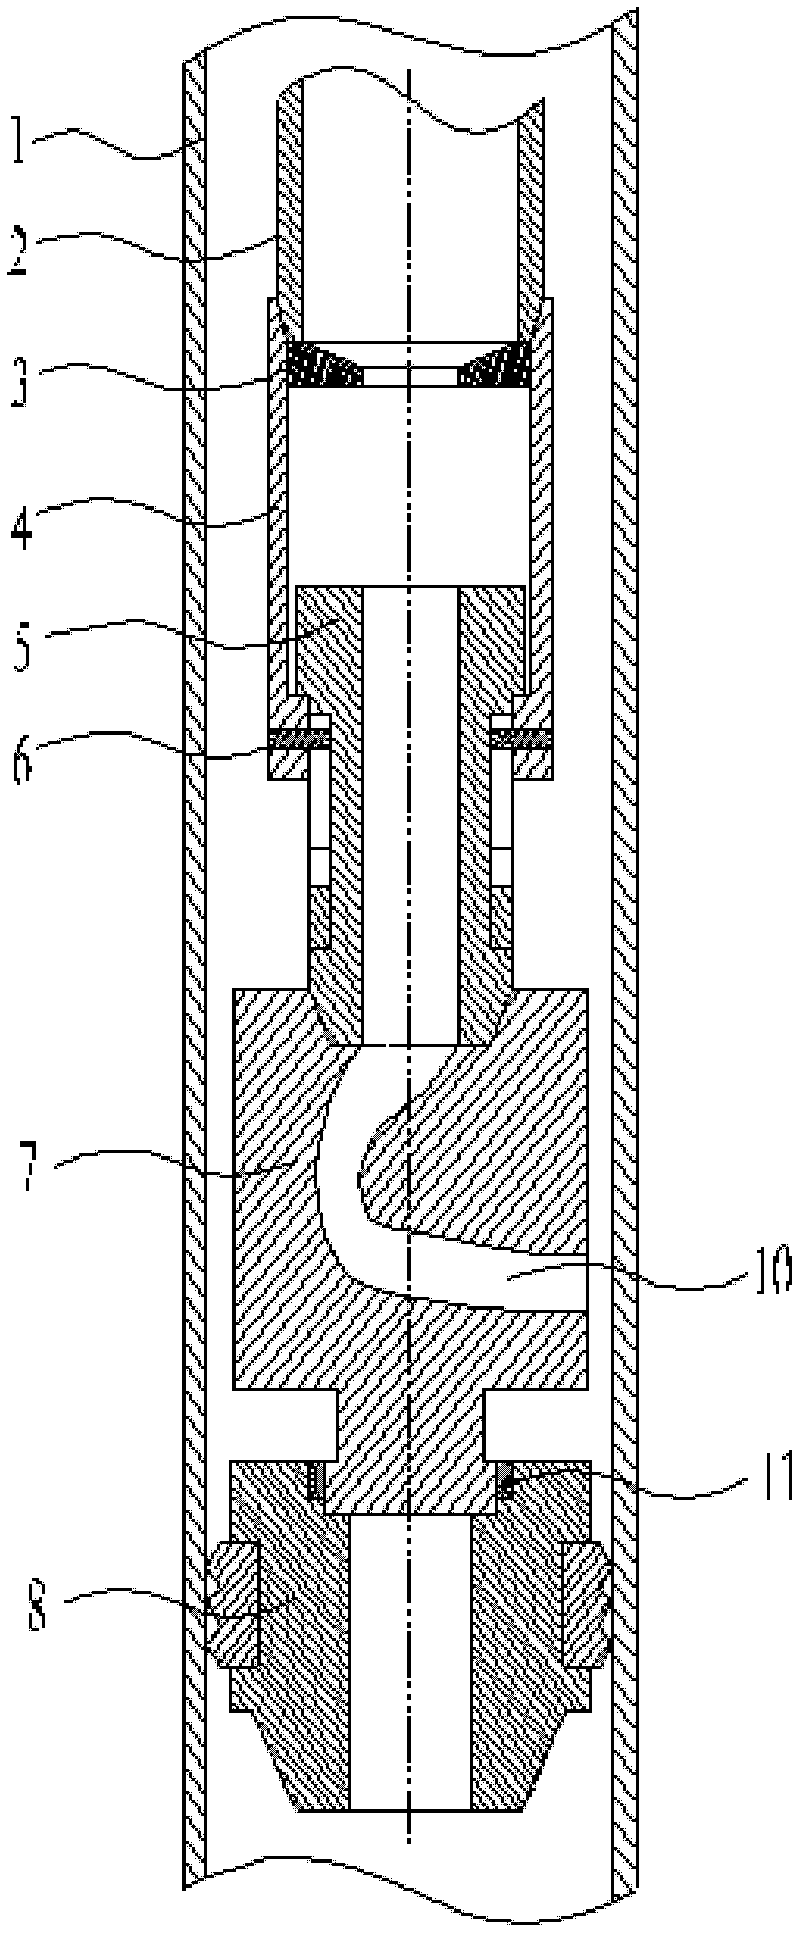 Radial horizontal well orienting device and method for operating same